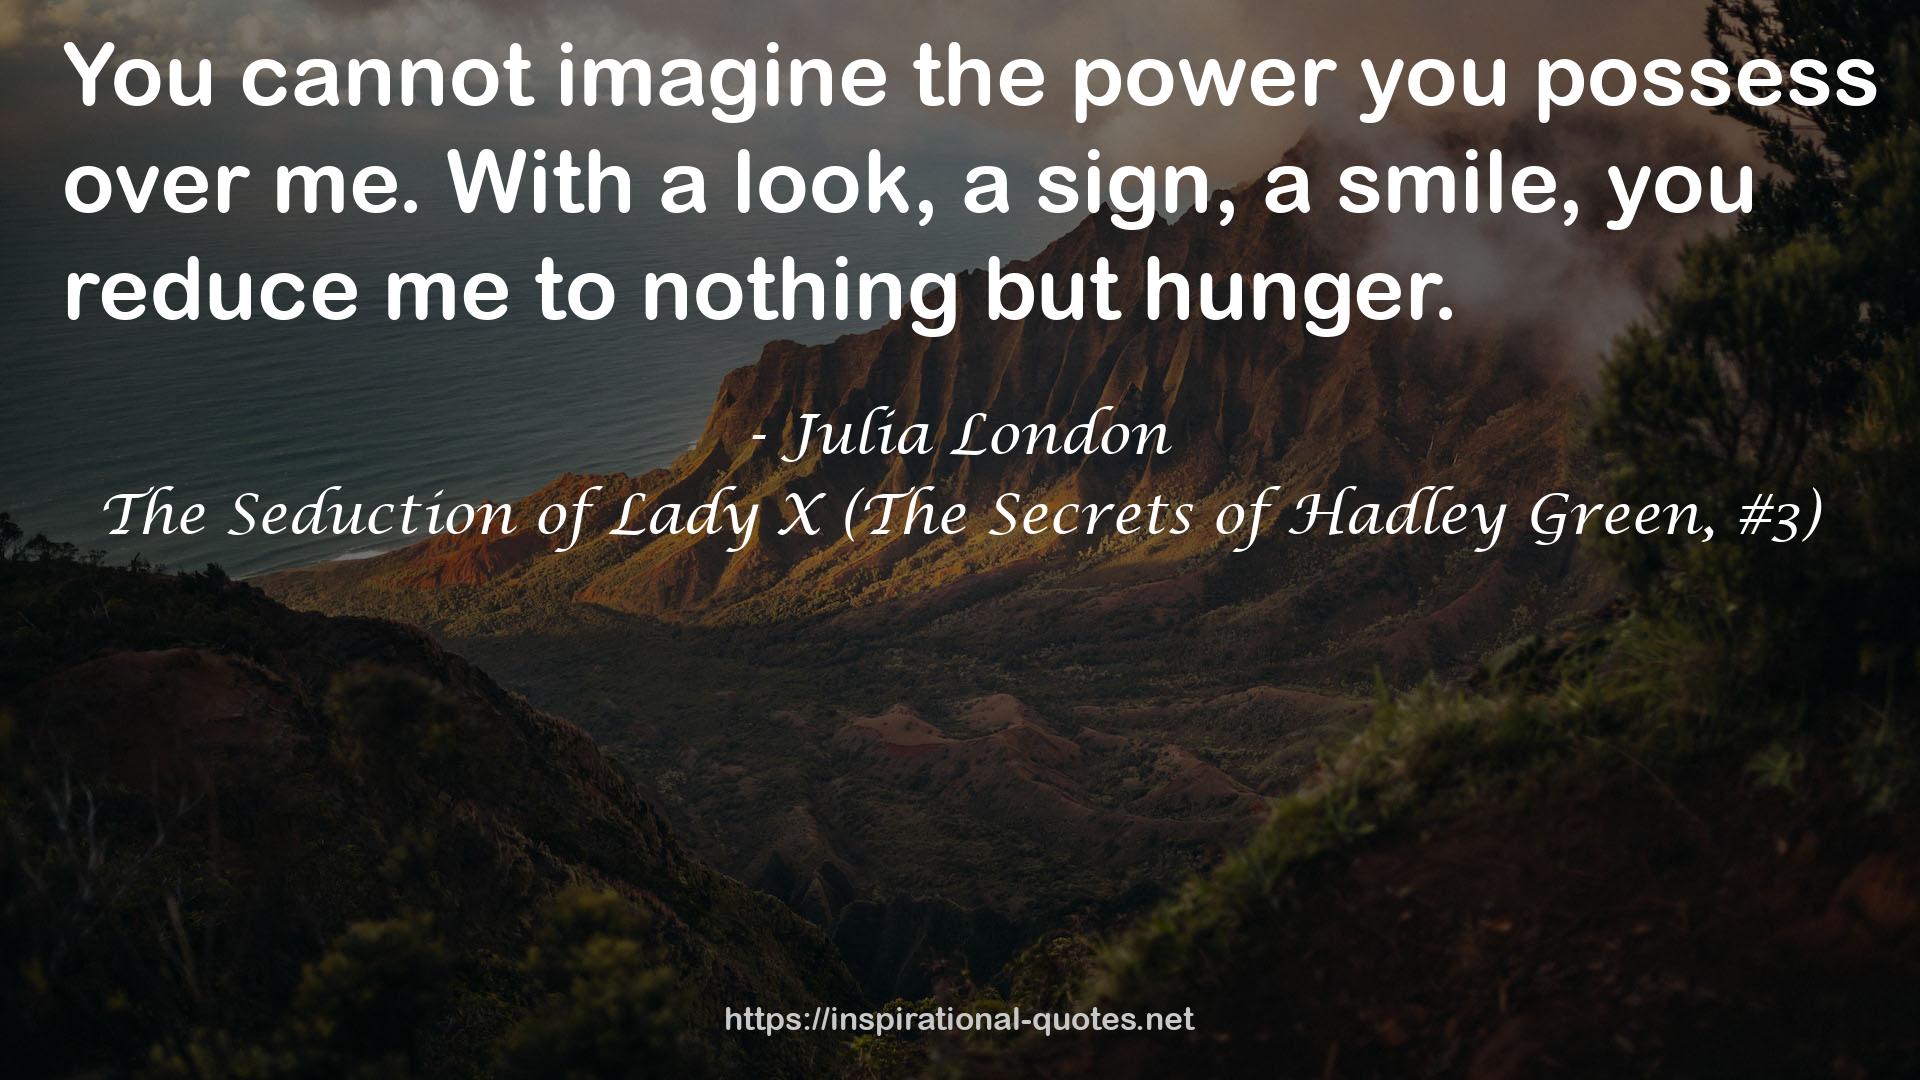 The Seduction of Lady X (The Secrets of Hadley Green, #3) QUOTES